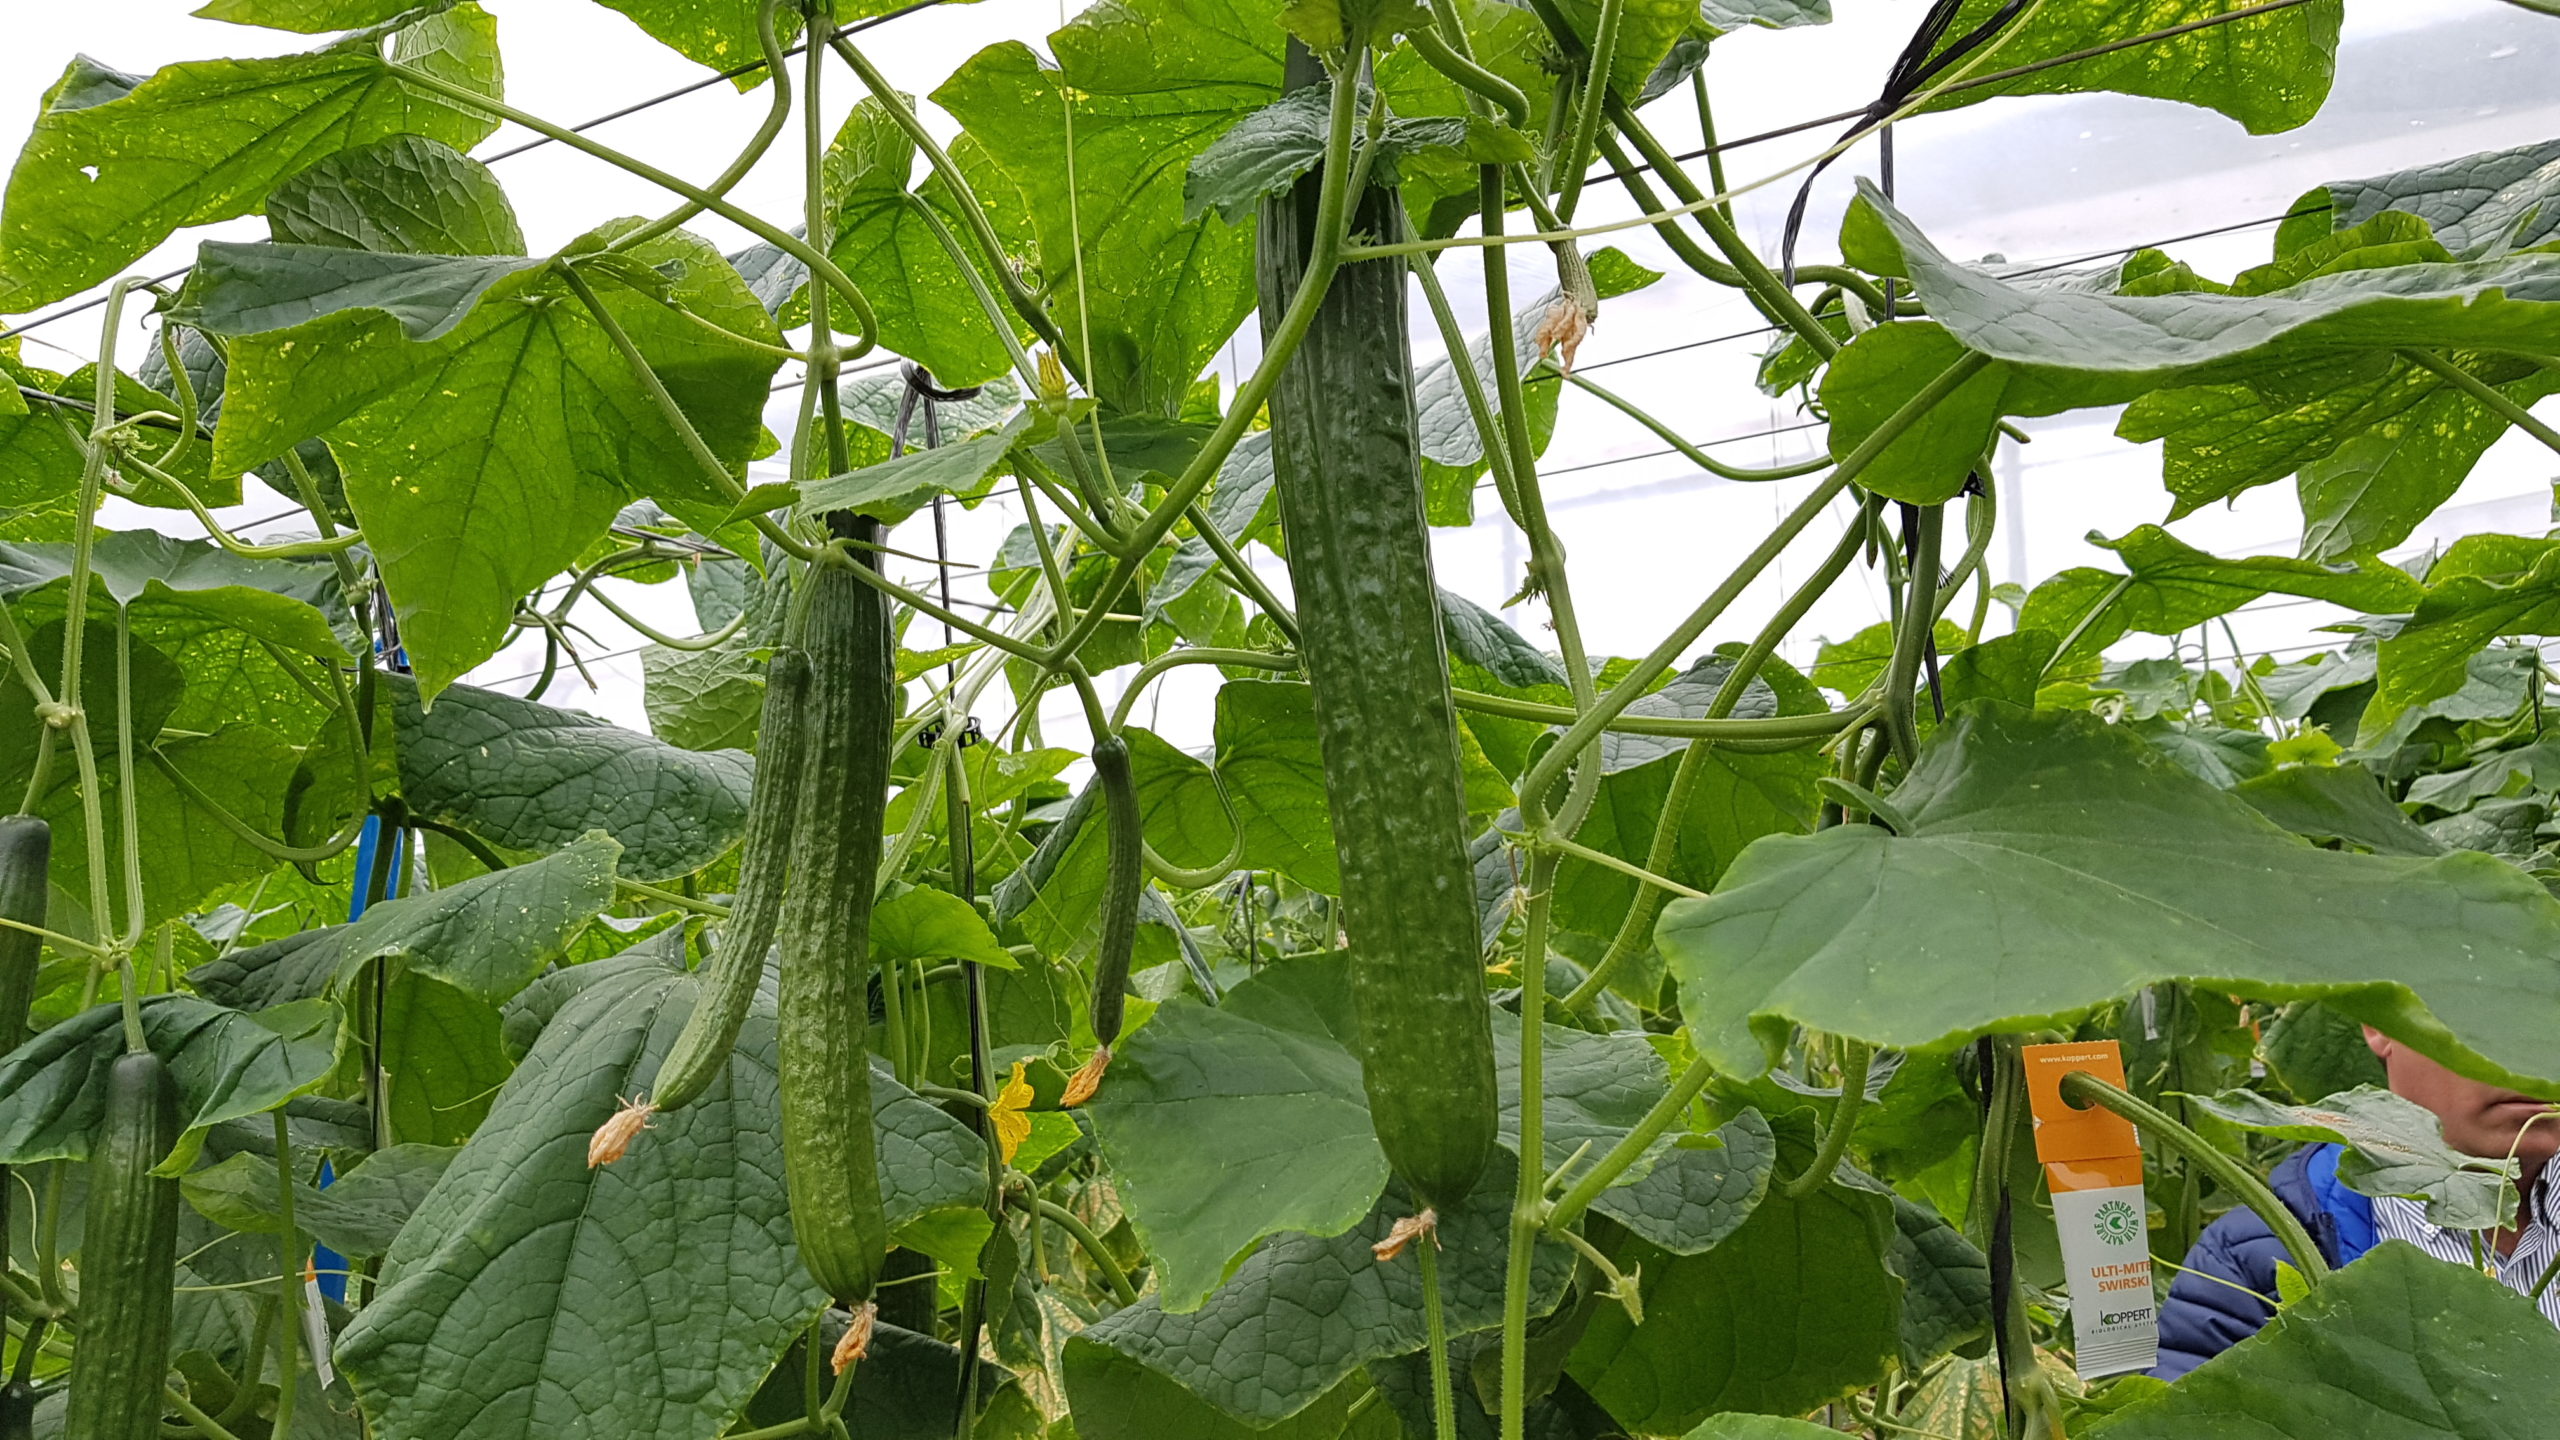 How to minimize crop loss and reduce the financial impact of disease on cucumbers?